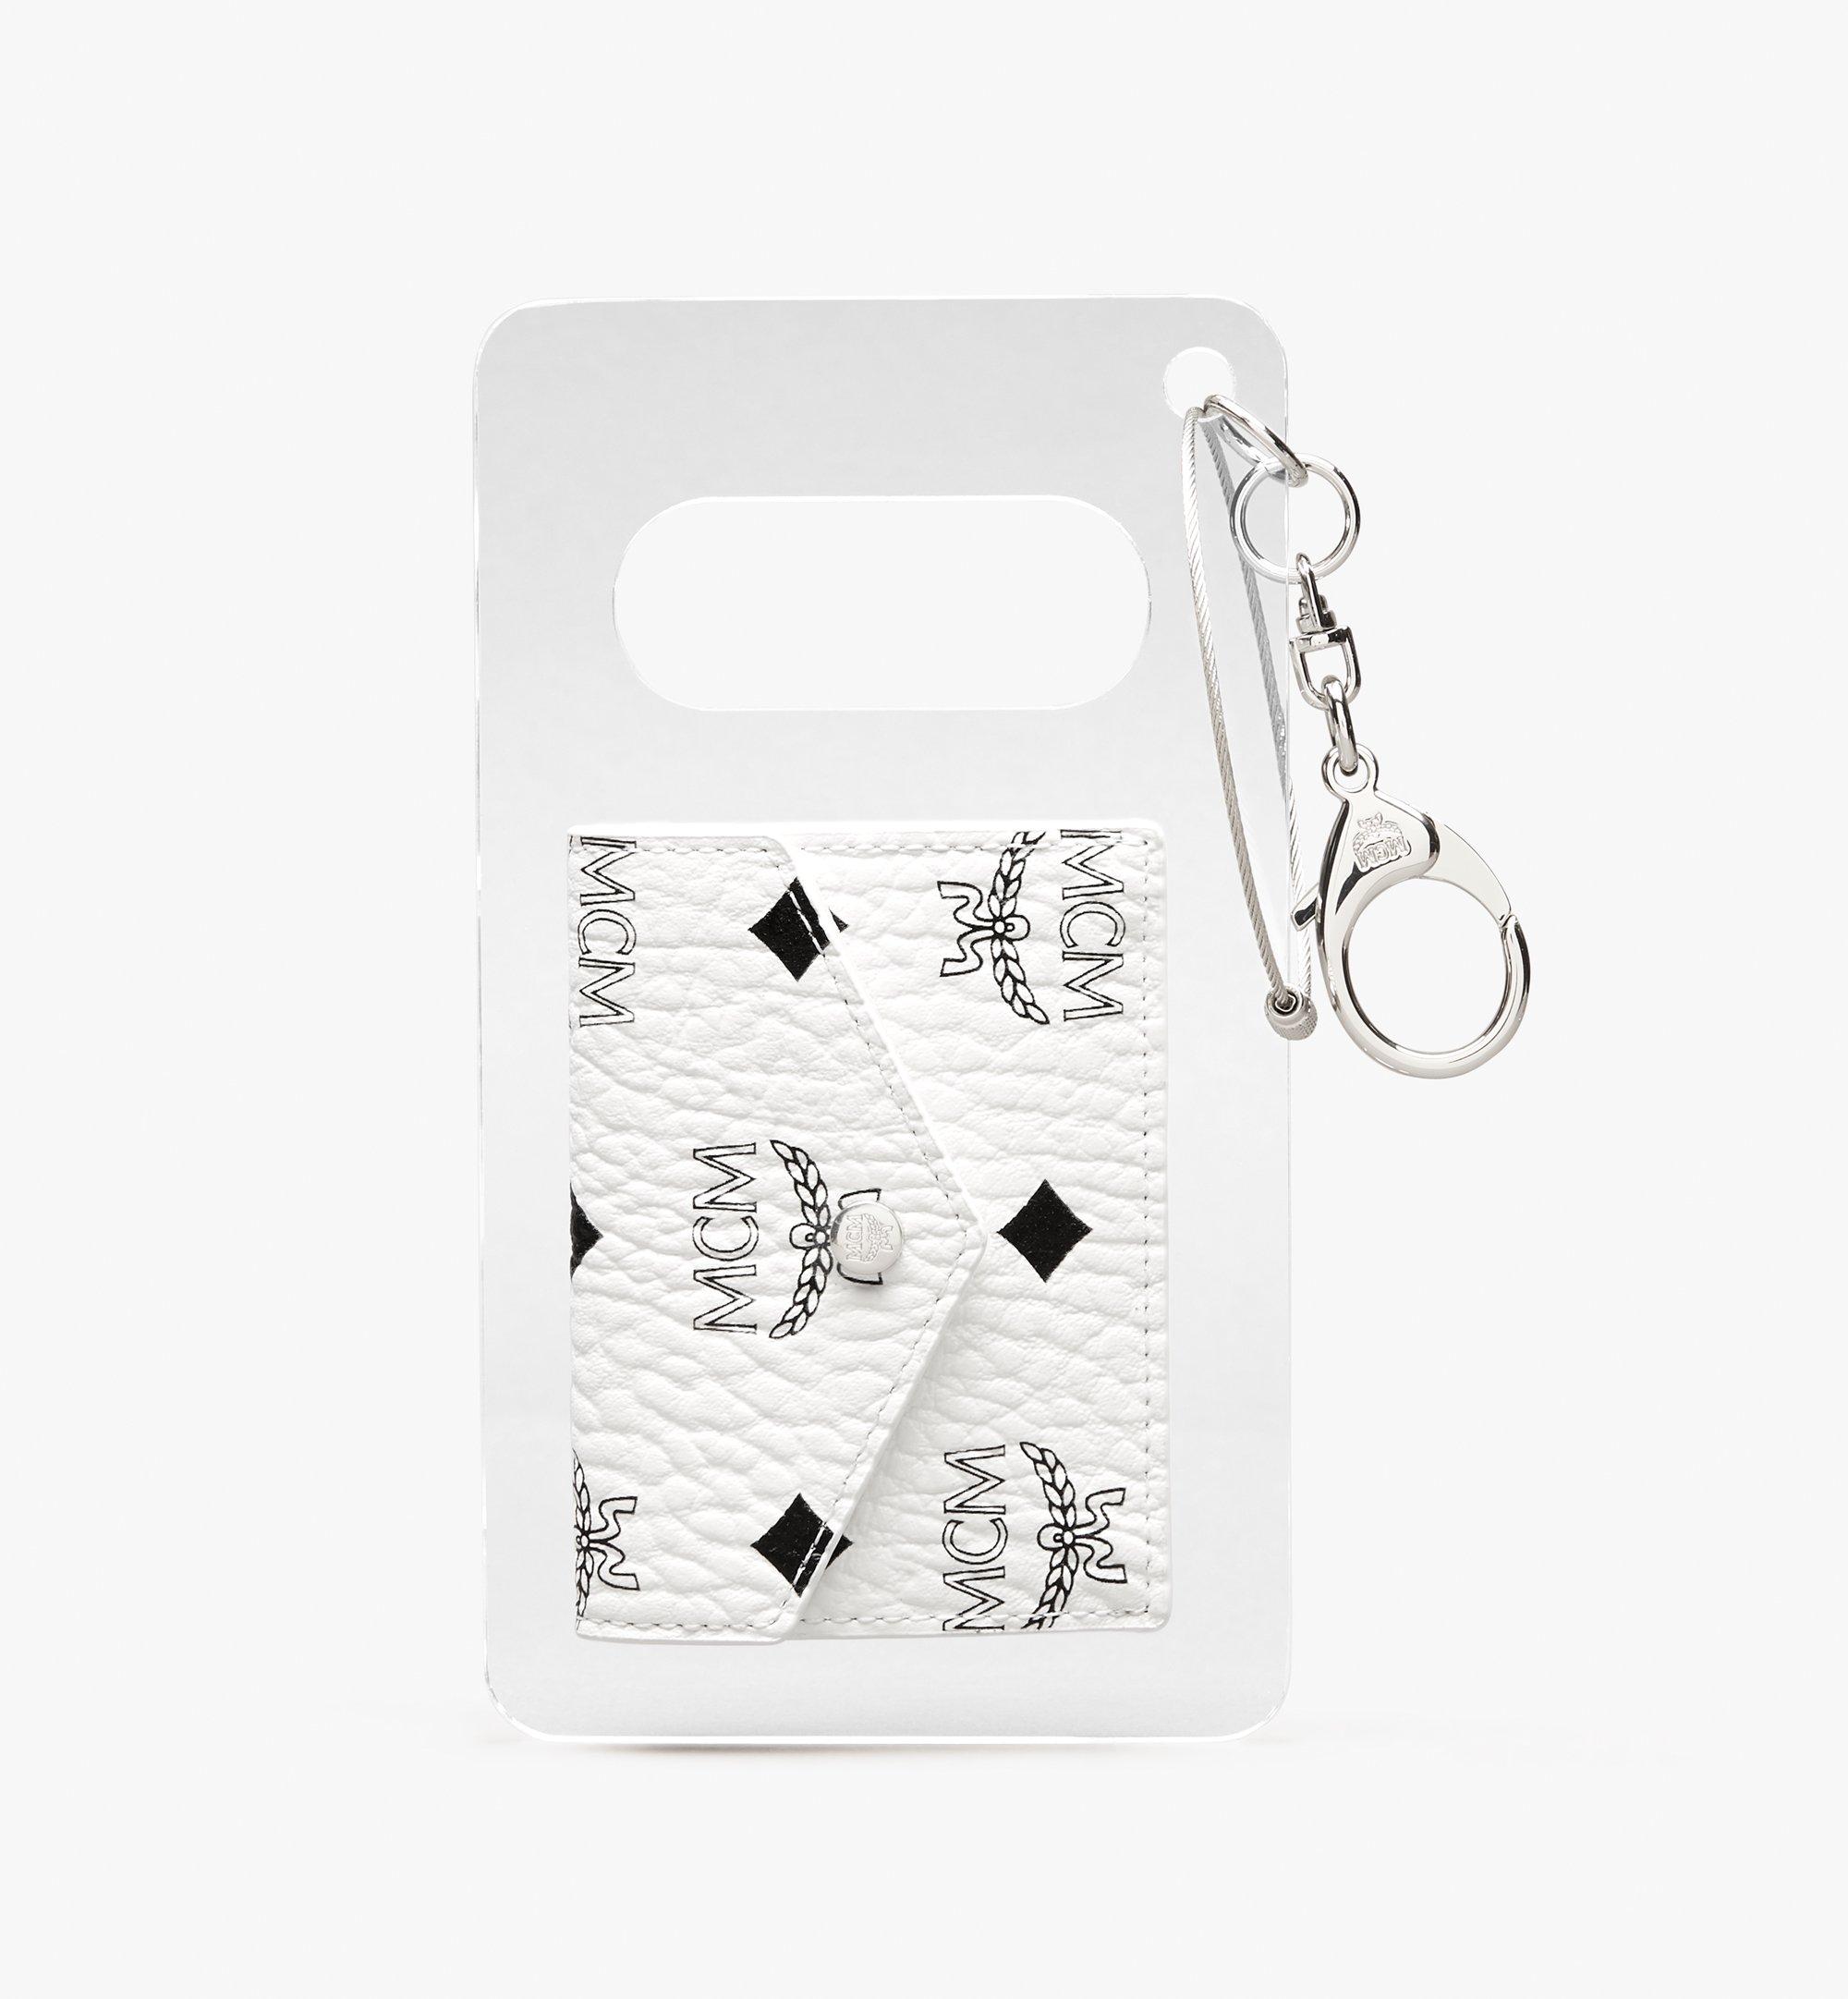 MCM MCM by PHENOMENON Acrylic Disk Coin Pouch in Visetos White MYAASJP02WT001 Alternate View 1